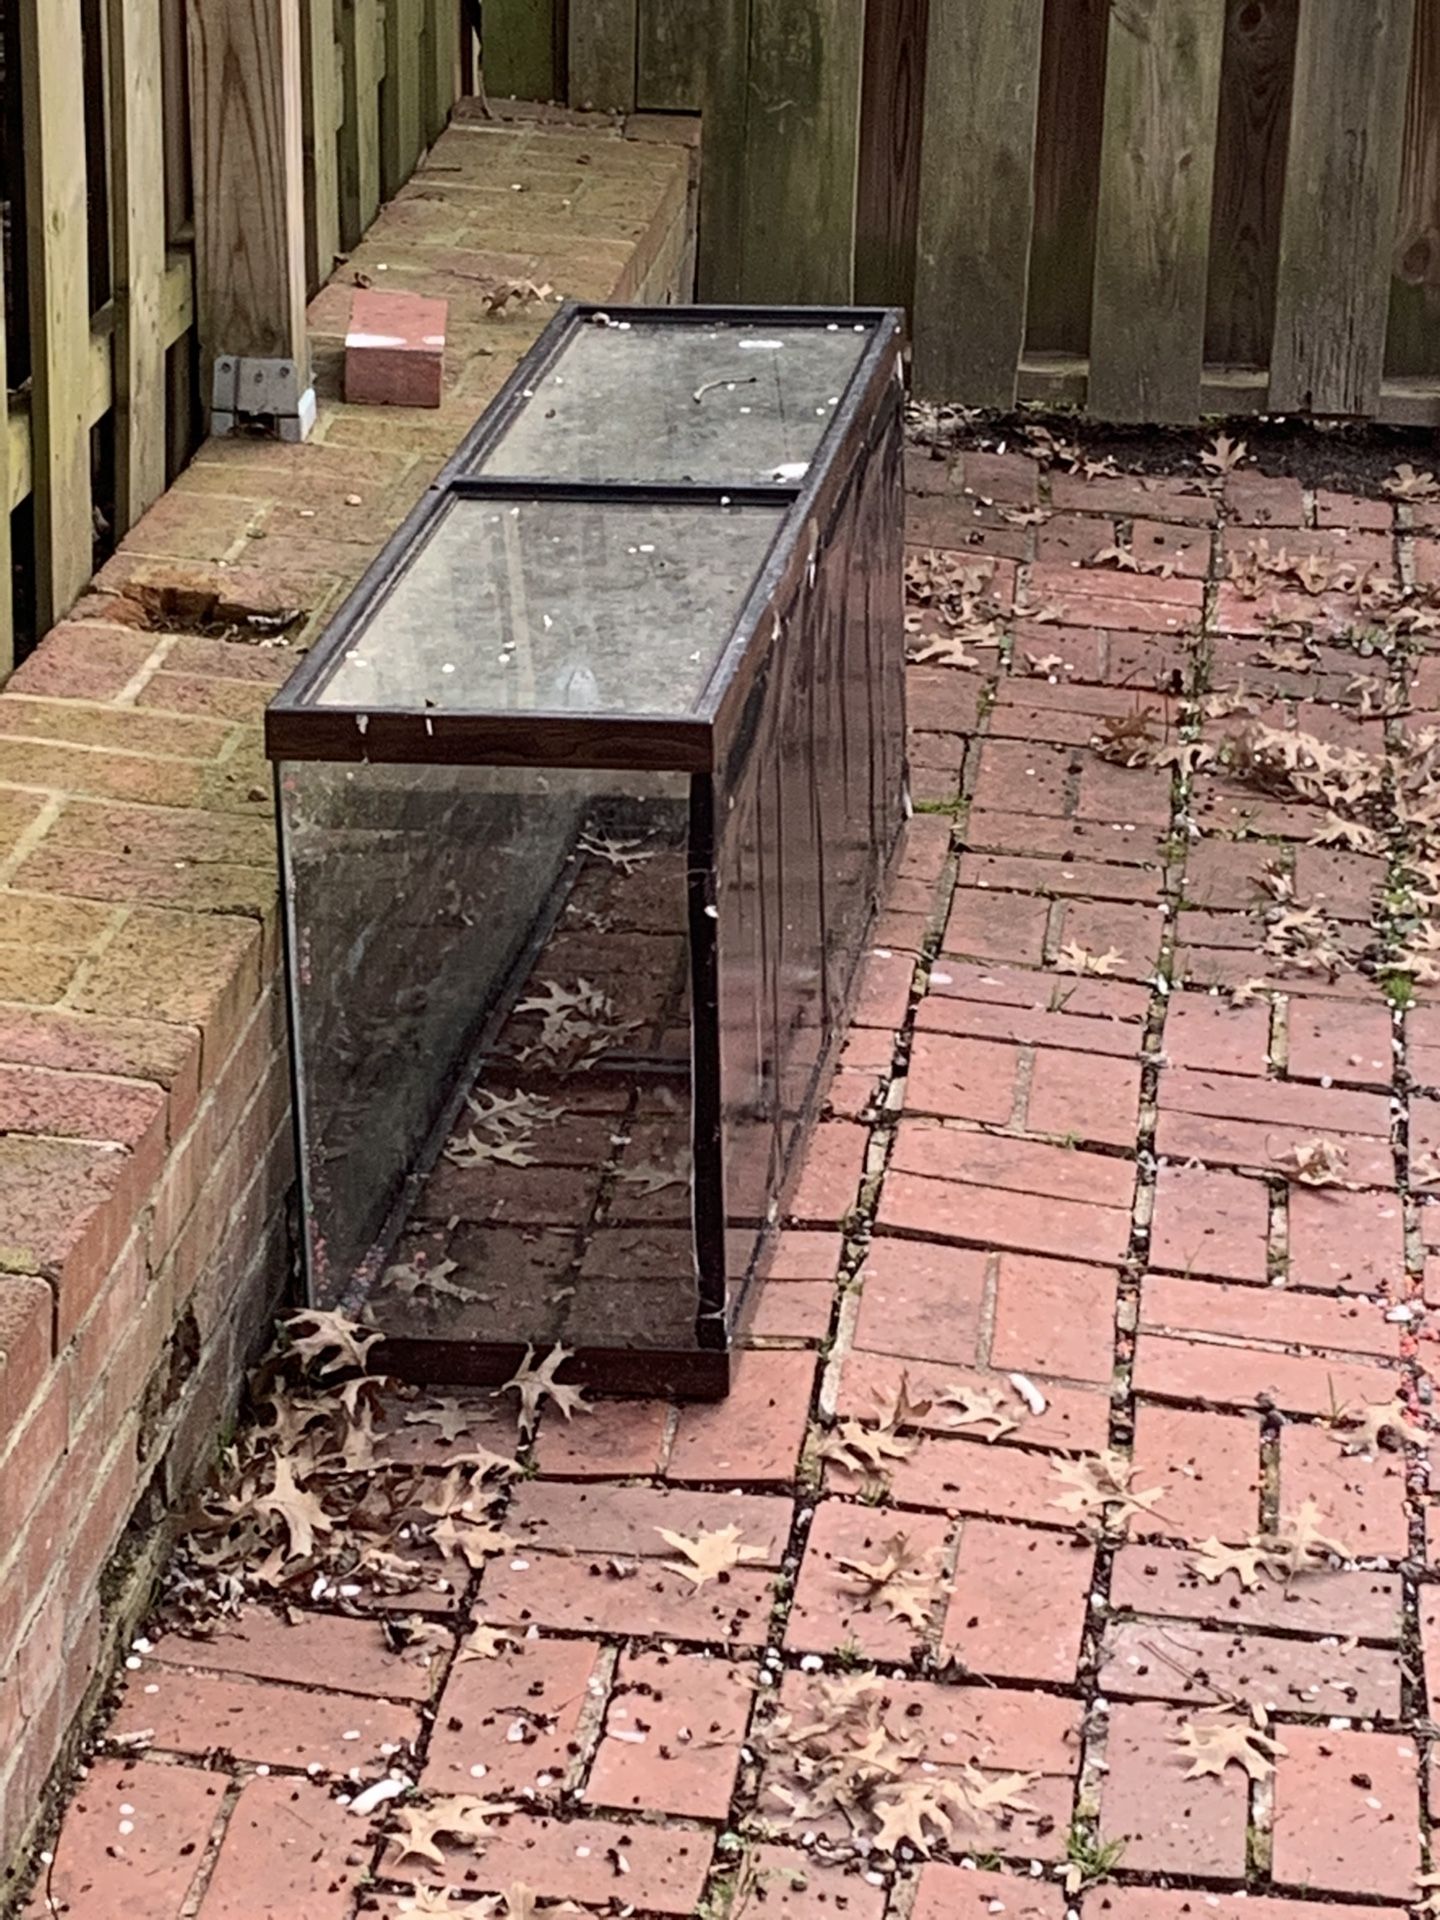 Fish tank and stand for sale